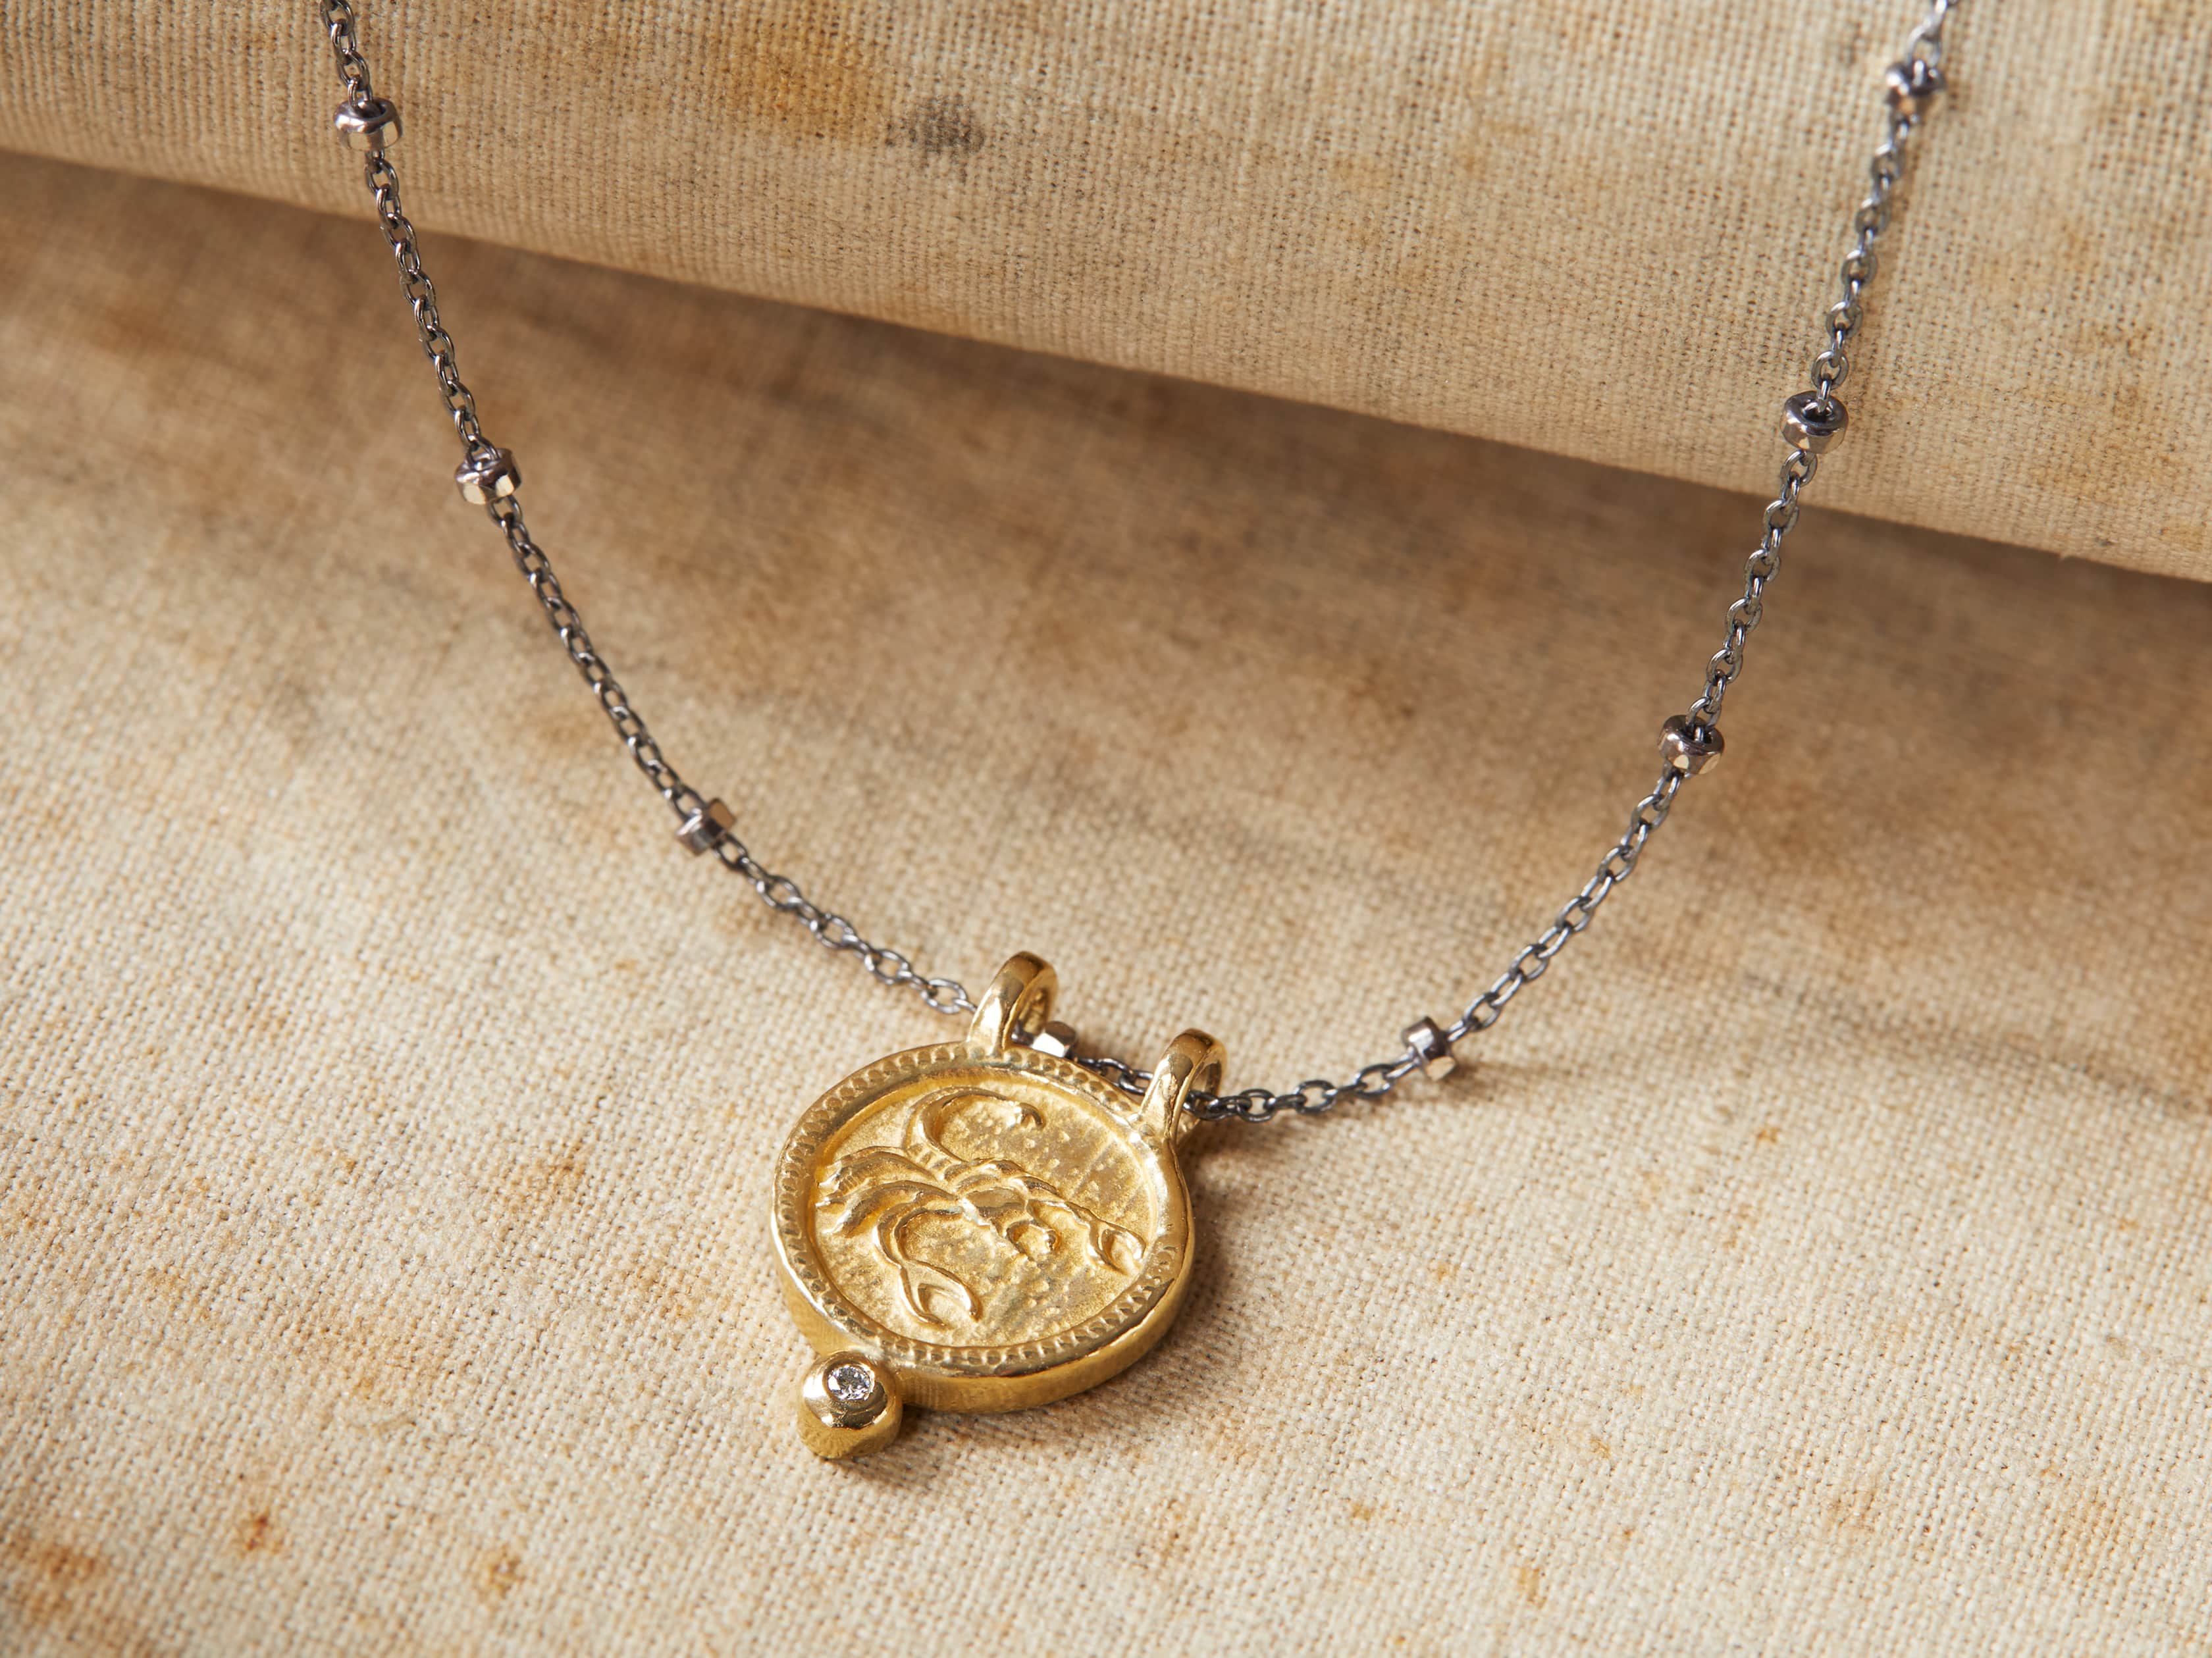 Scorpio Zodiac Necklace - For Women and Men - Scorpion Symbol with Name of  the Sign - Stainless Steel and 18K Gold Plate